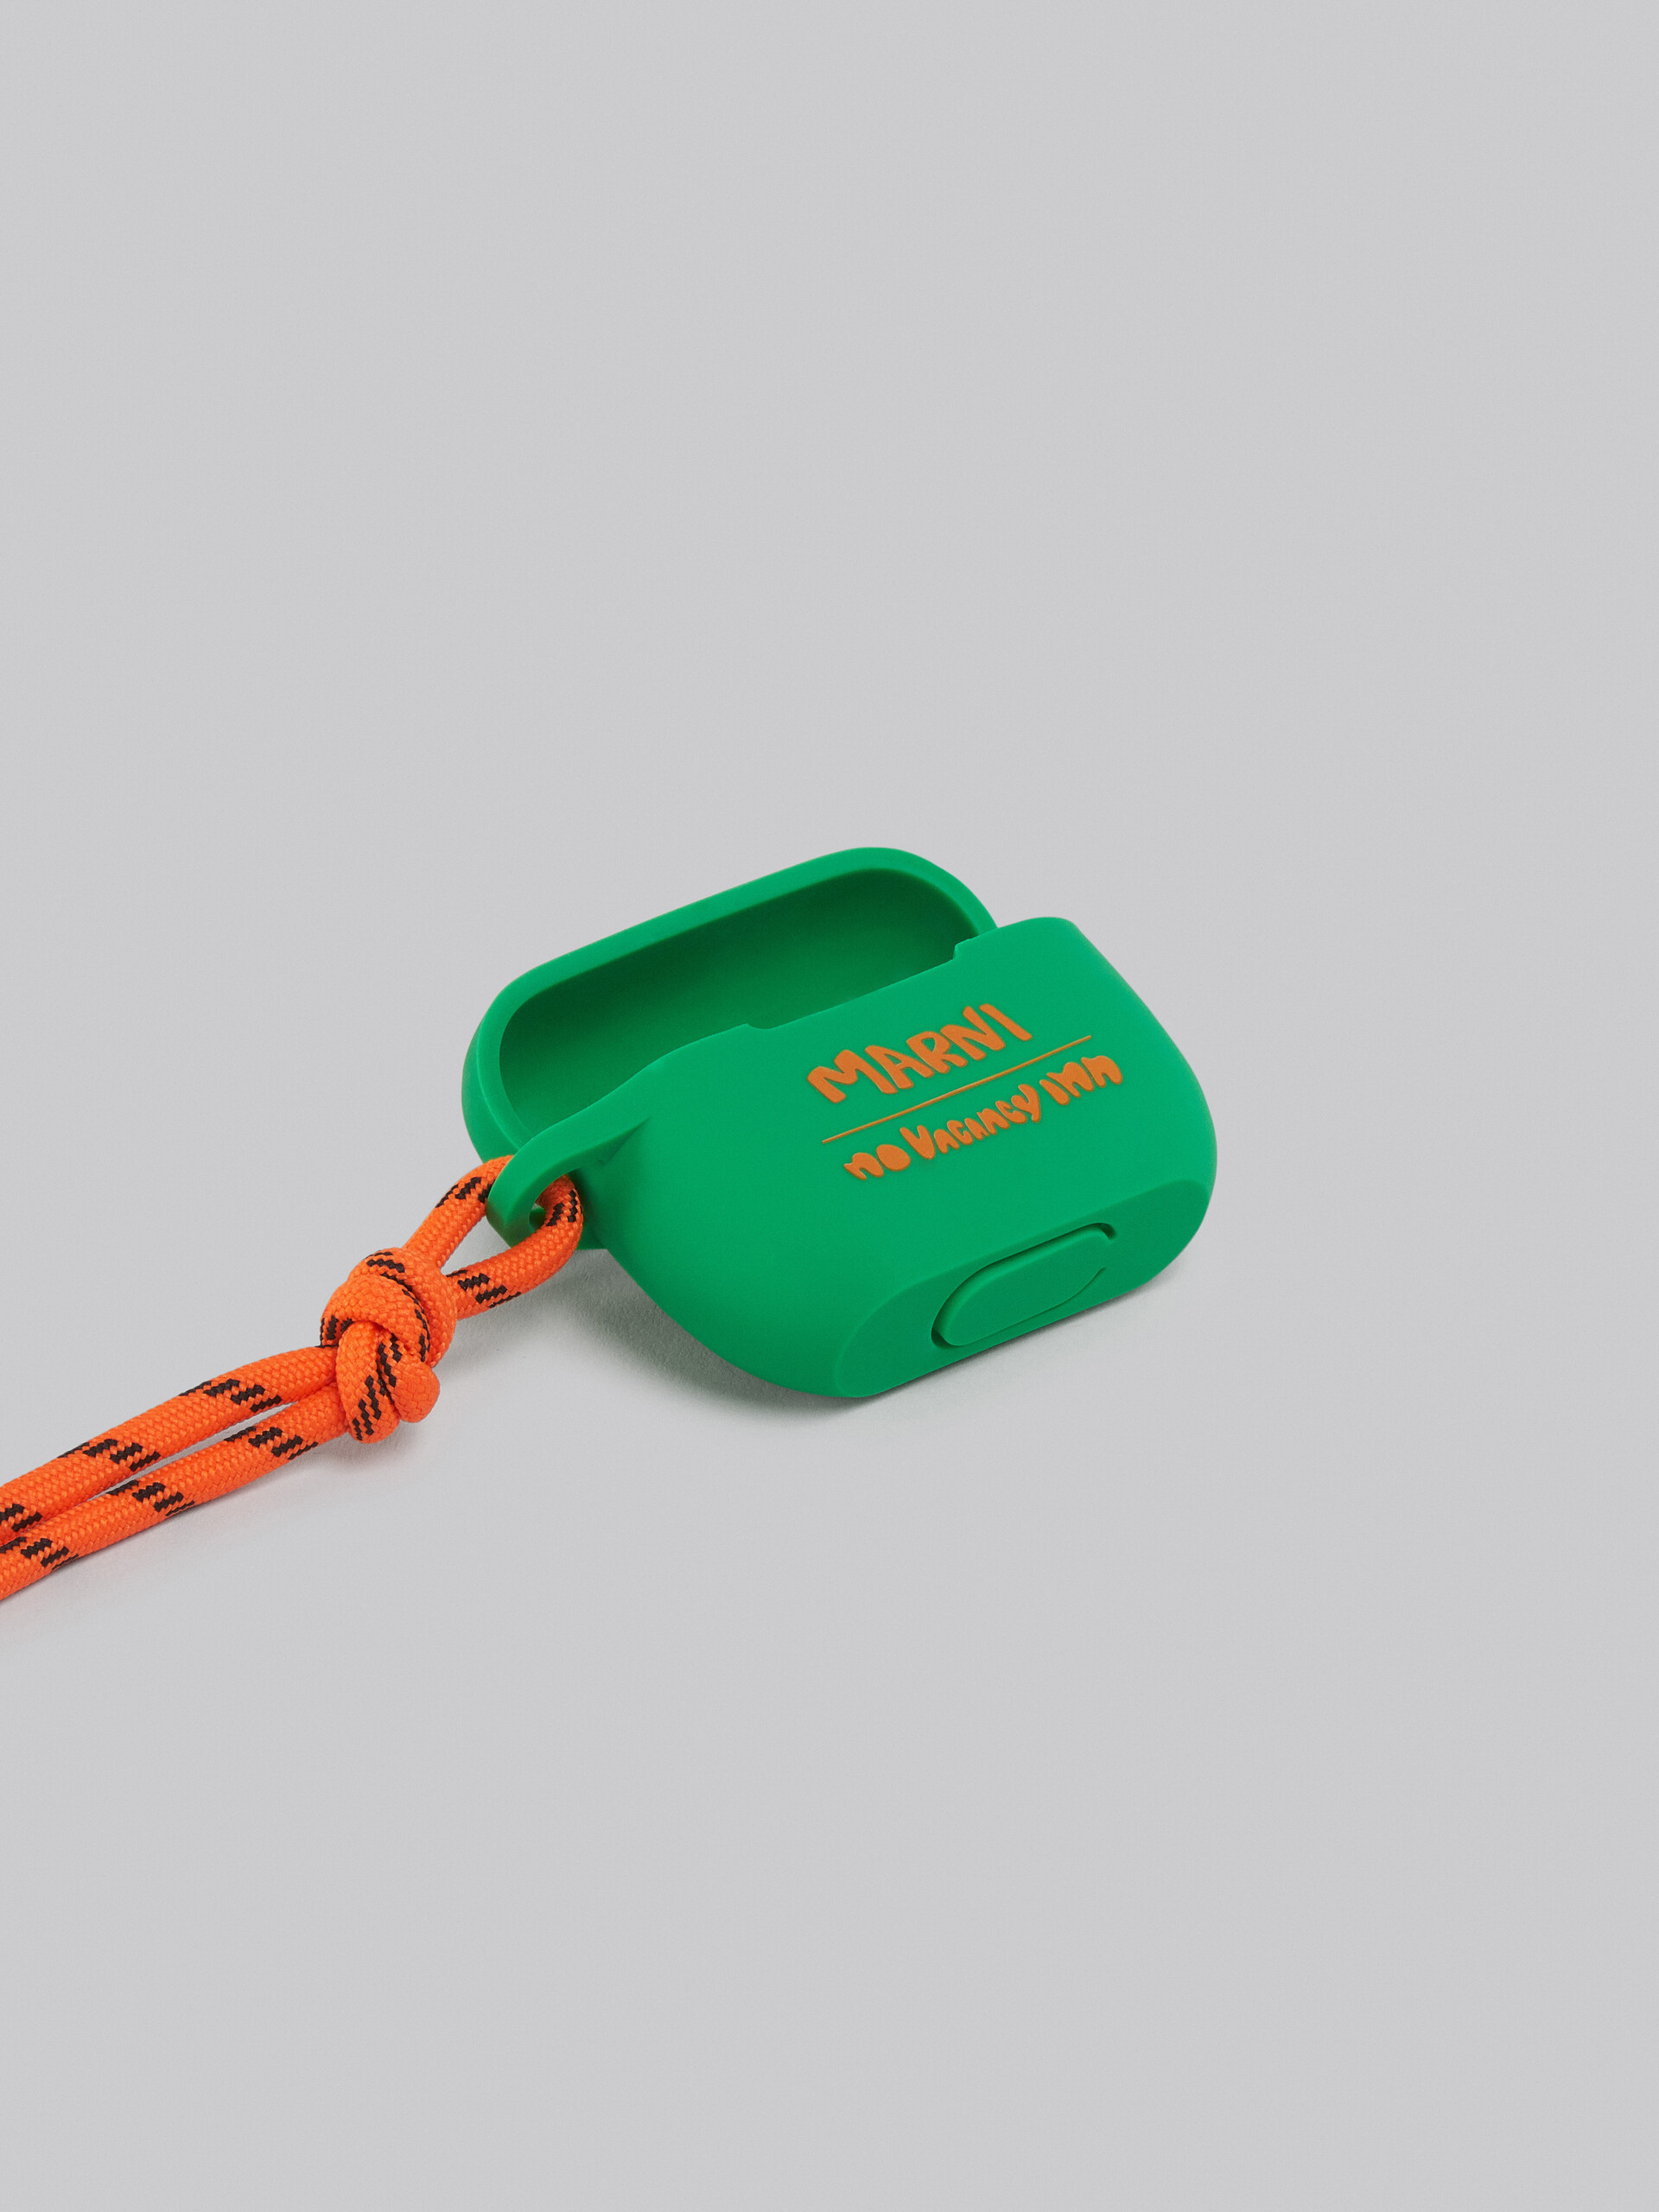 Marni x No Vacancy Inn - Green and orange Airpods case - Other accessories - Image 4